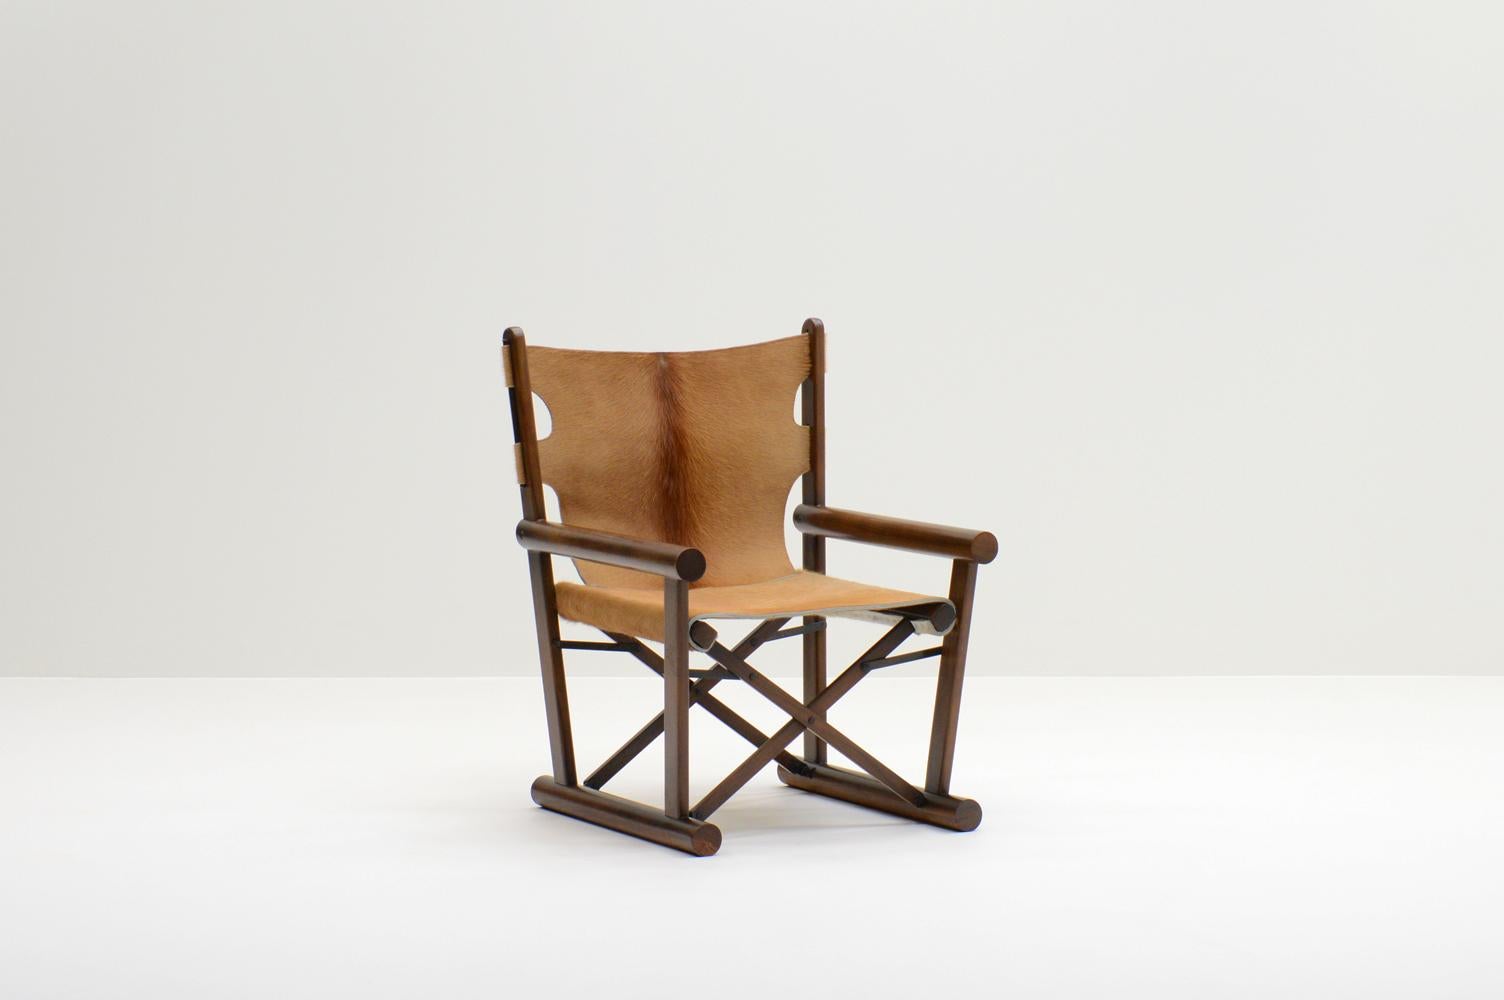 PL22 chair by Carlo Hauner & Martin Eisler for OCA, Brazil 60s. Solid tropical hardwood frame and reupholstered in cow hide leather. Frame has a nice patina and in very good vintage condition. 

Request a quote for the latest shipping rates.